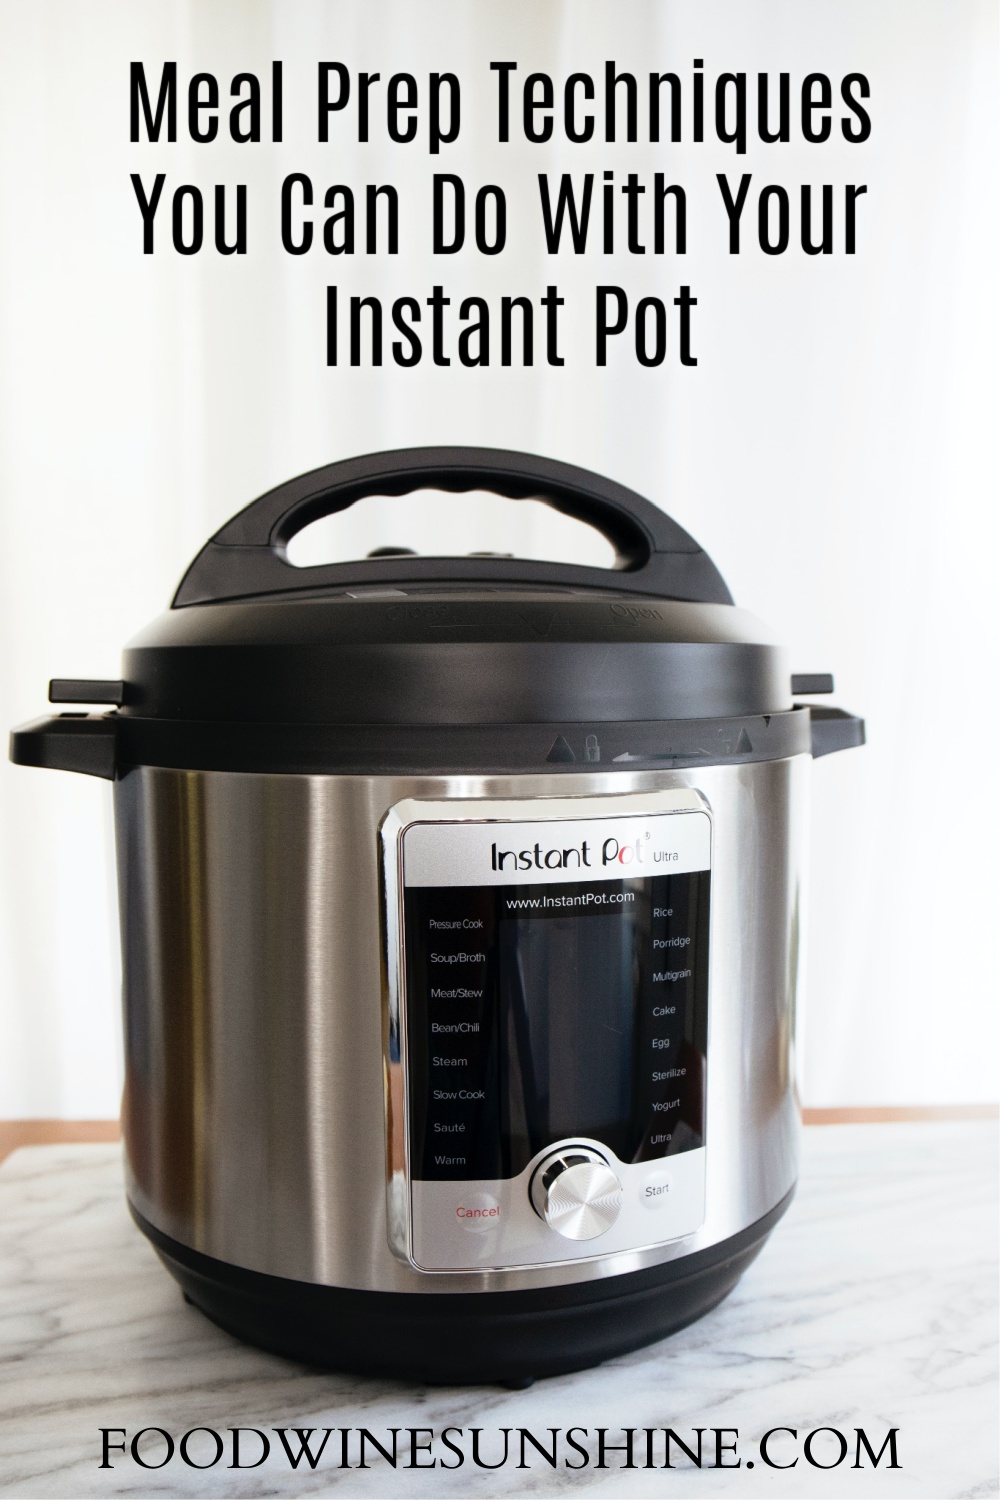 Healthy Meal Prep Ideas You Can Do With Your Instant Pot